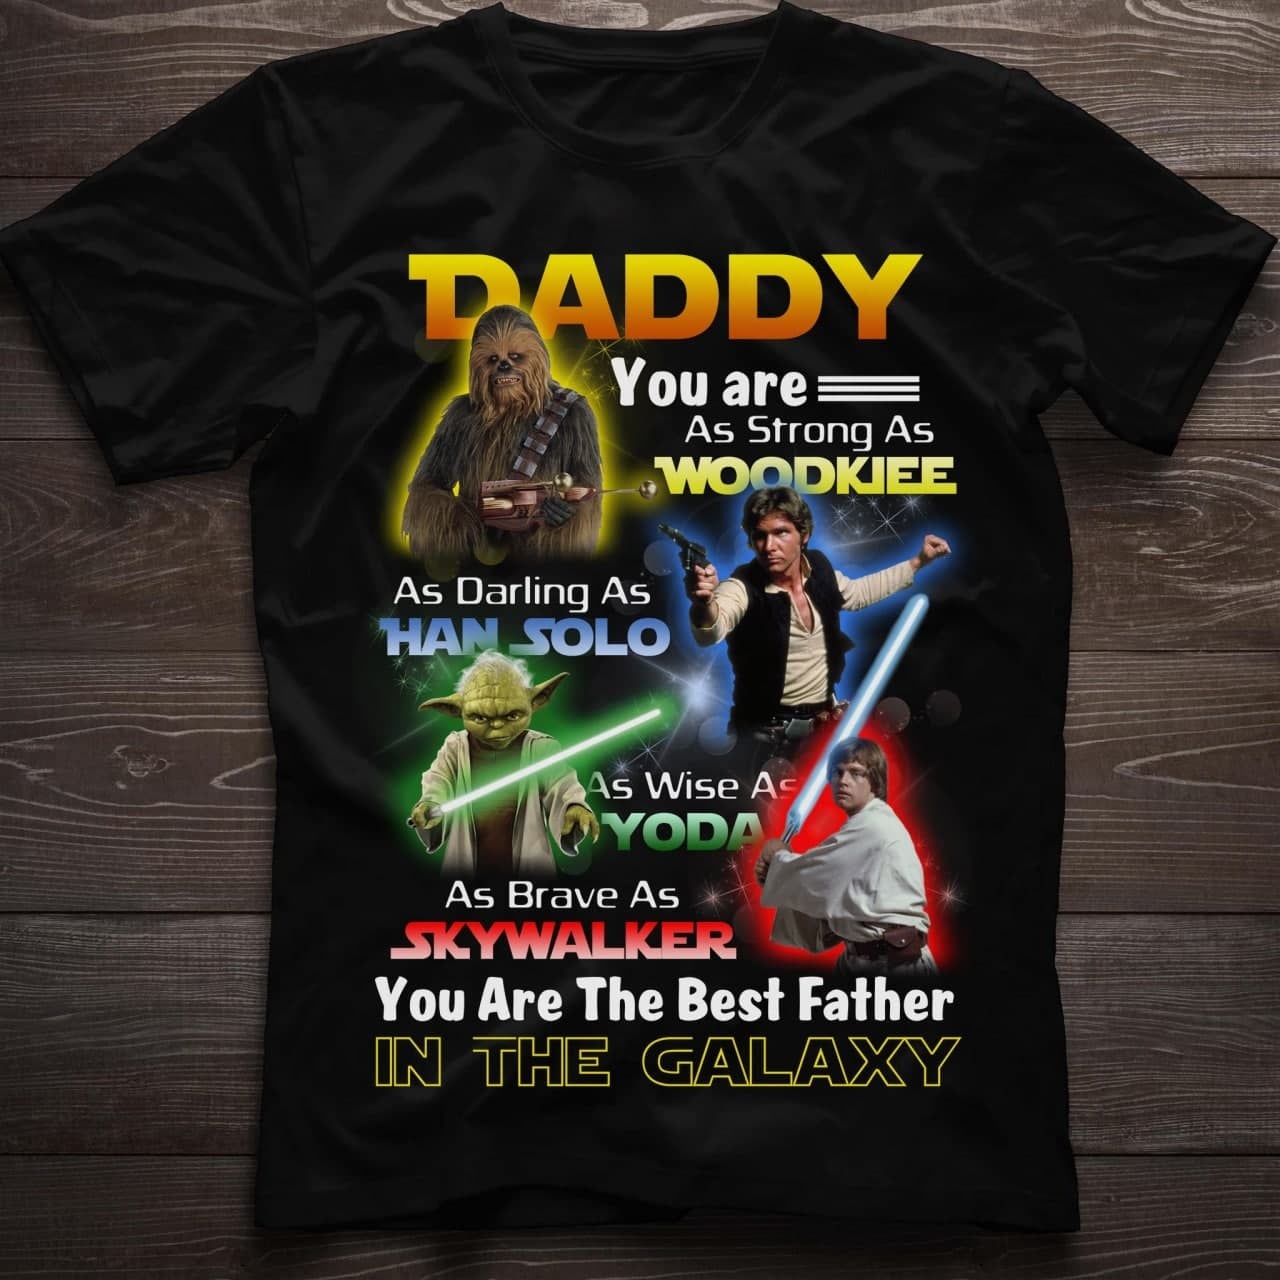 Daddy you are as trong as Woodkiee as darling as Han Solo as wise as Yoda as Brave as Skywalker in the Galaxy